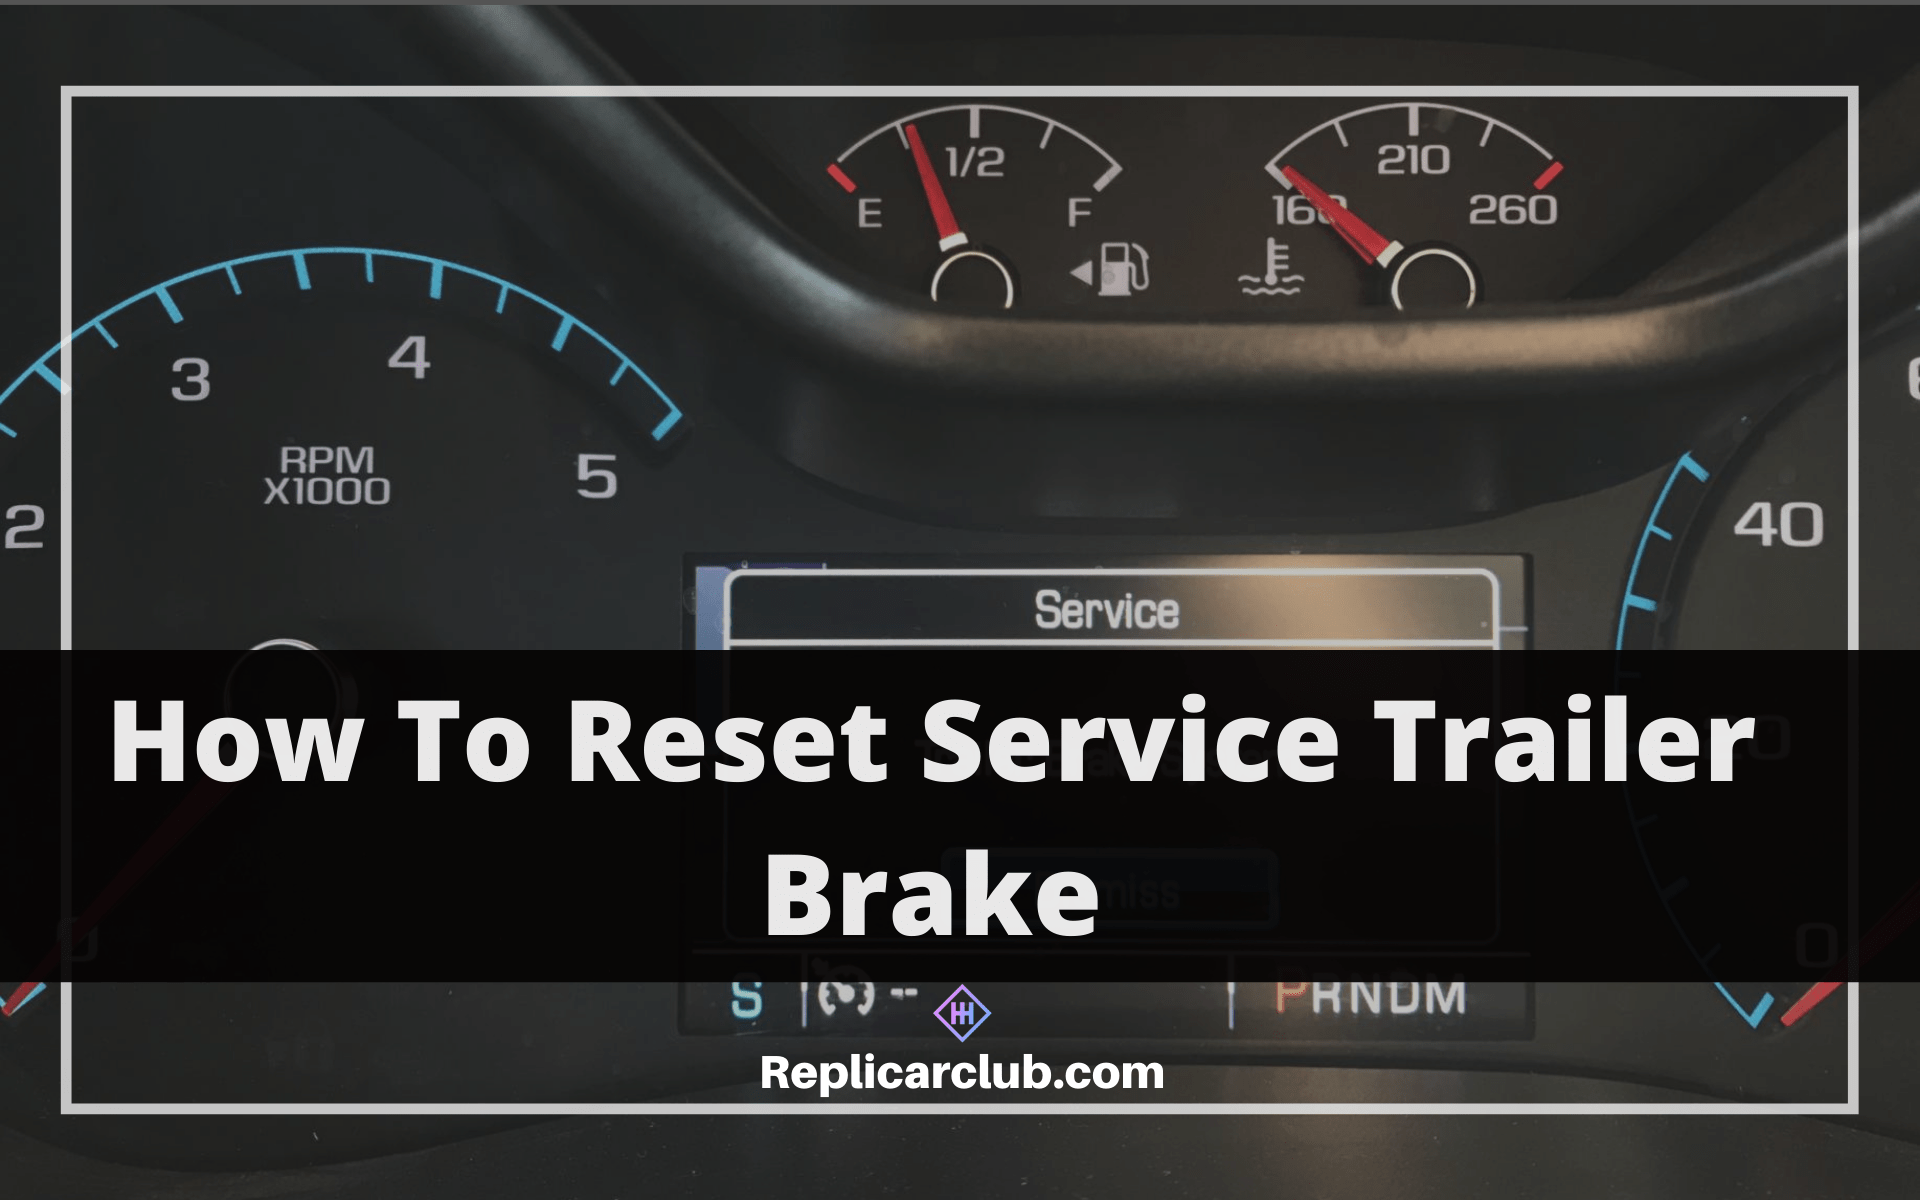 How To Reset Service Trailer Brake?